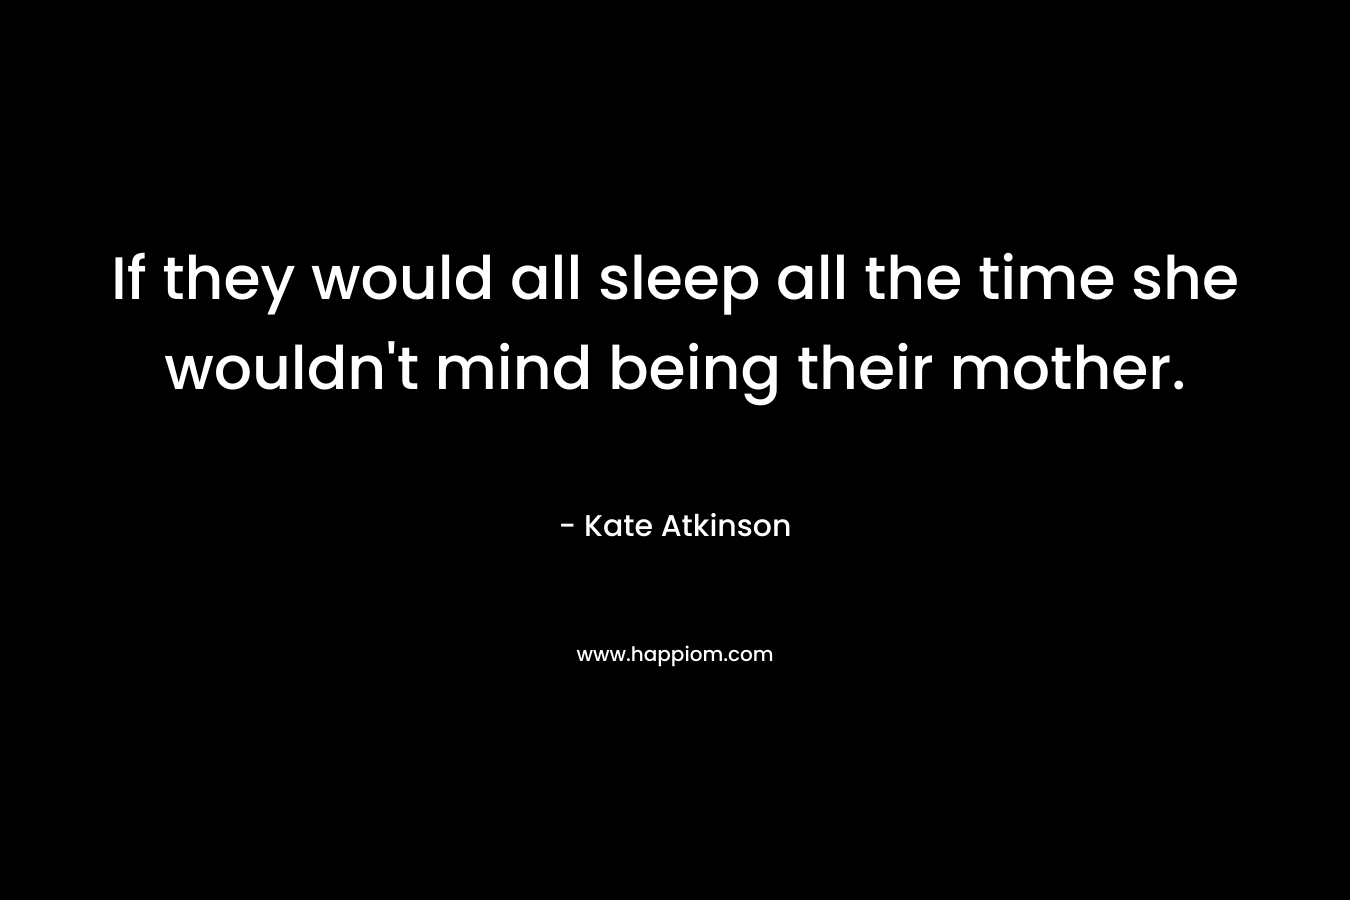 If they would all sleep all the time she wouldn’t mind being their mother. – Kate Atkinson